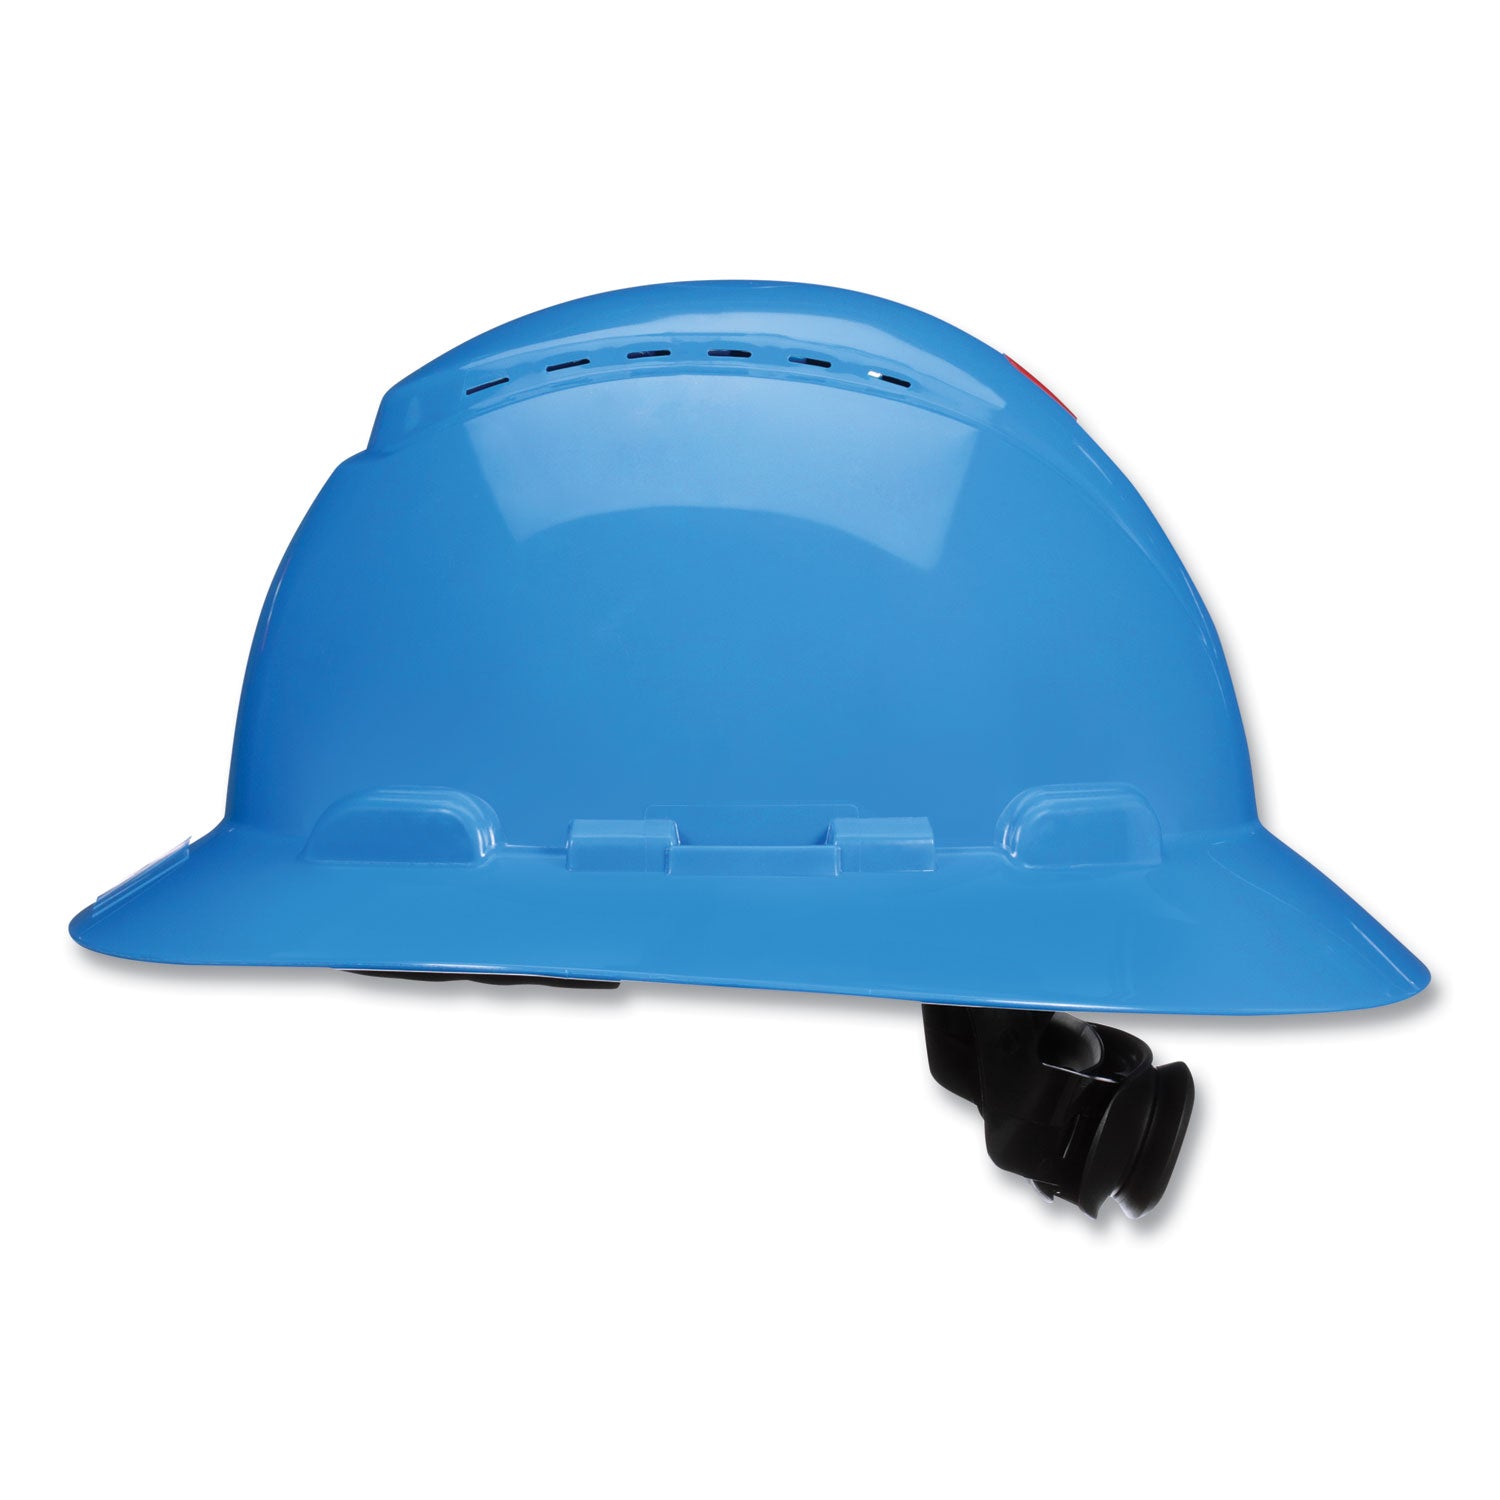 securefit-h-series-hard-hats-h-800-vented-hat-with-uv-indicator-4-point-pressure-diffusion-ratchet-suspension-blue_mmmh803sfvuv - 1